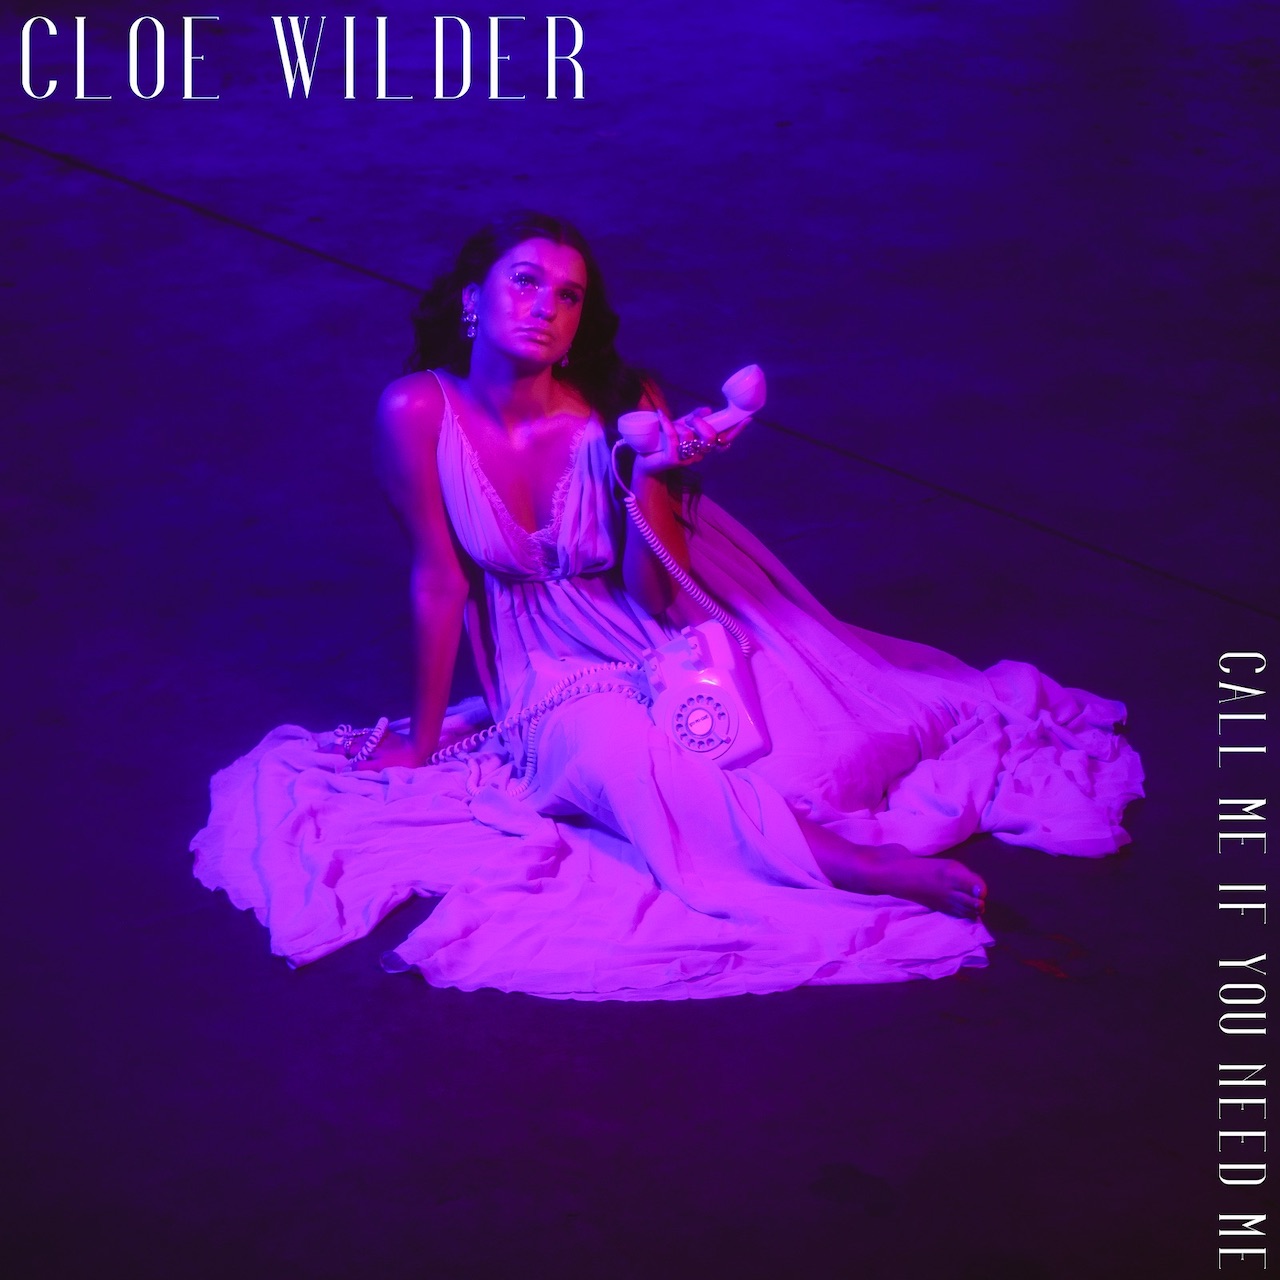 Cloe Wilder Releases Stunning New Single, "Call Me If You Need Me"